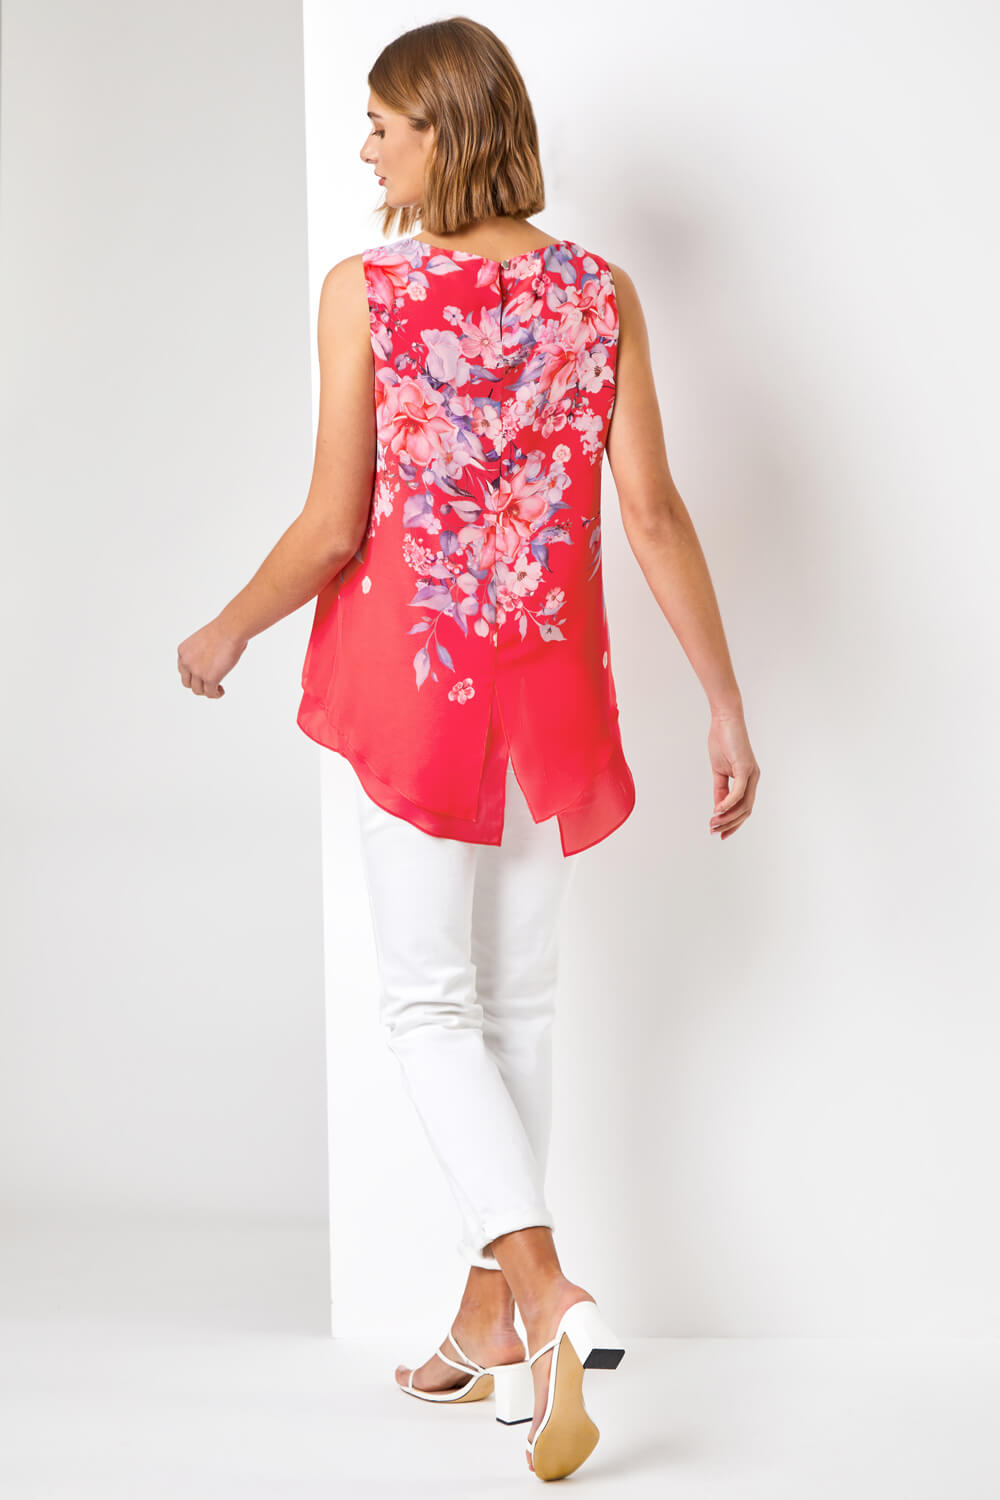 Red Floral Print Chiffon Overlay Top, Image 2 of 4